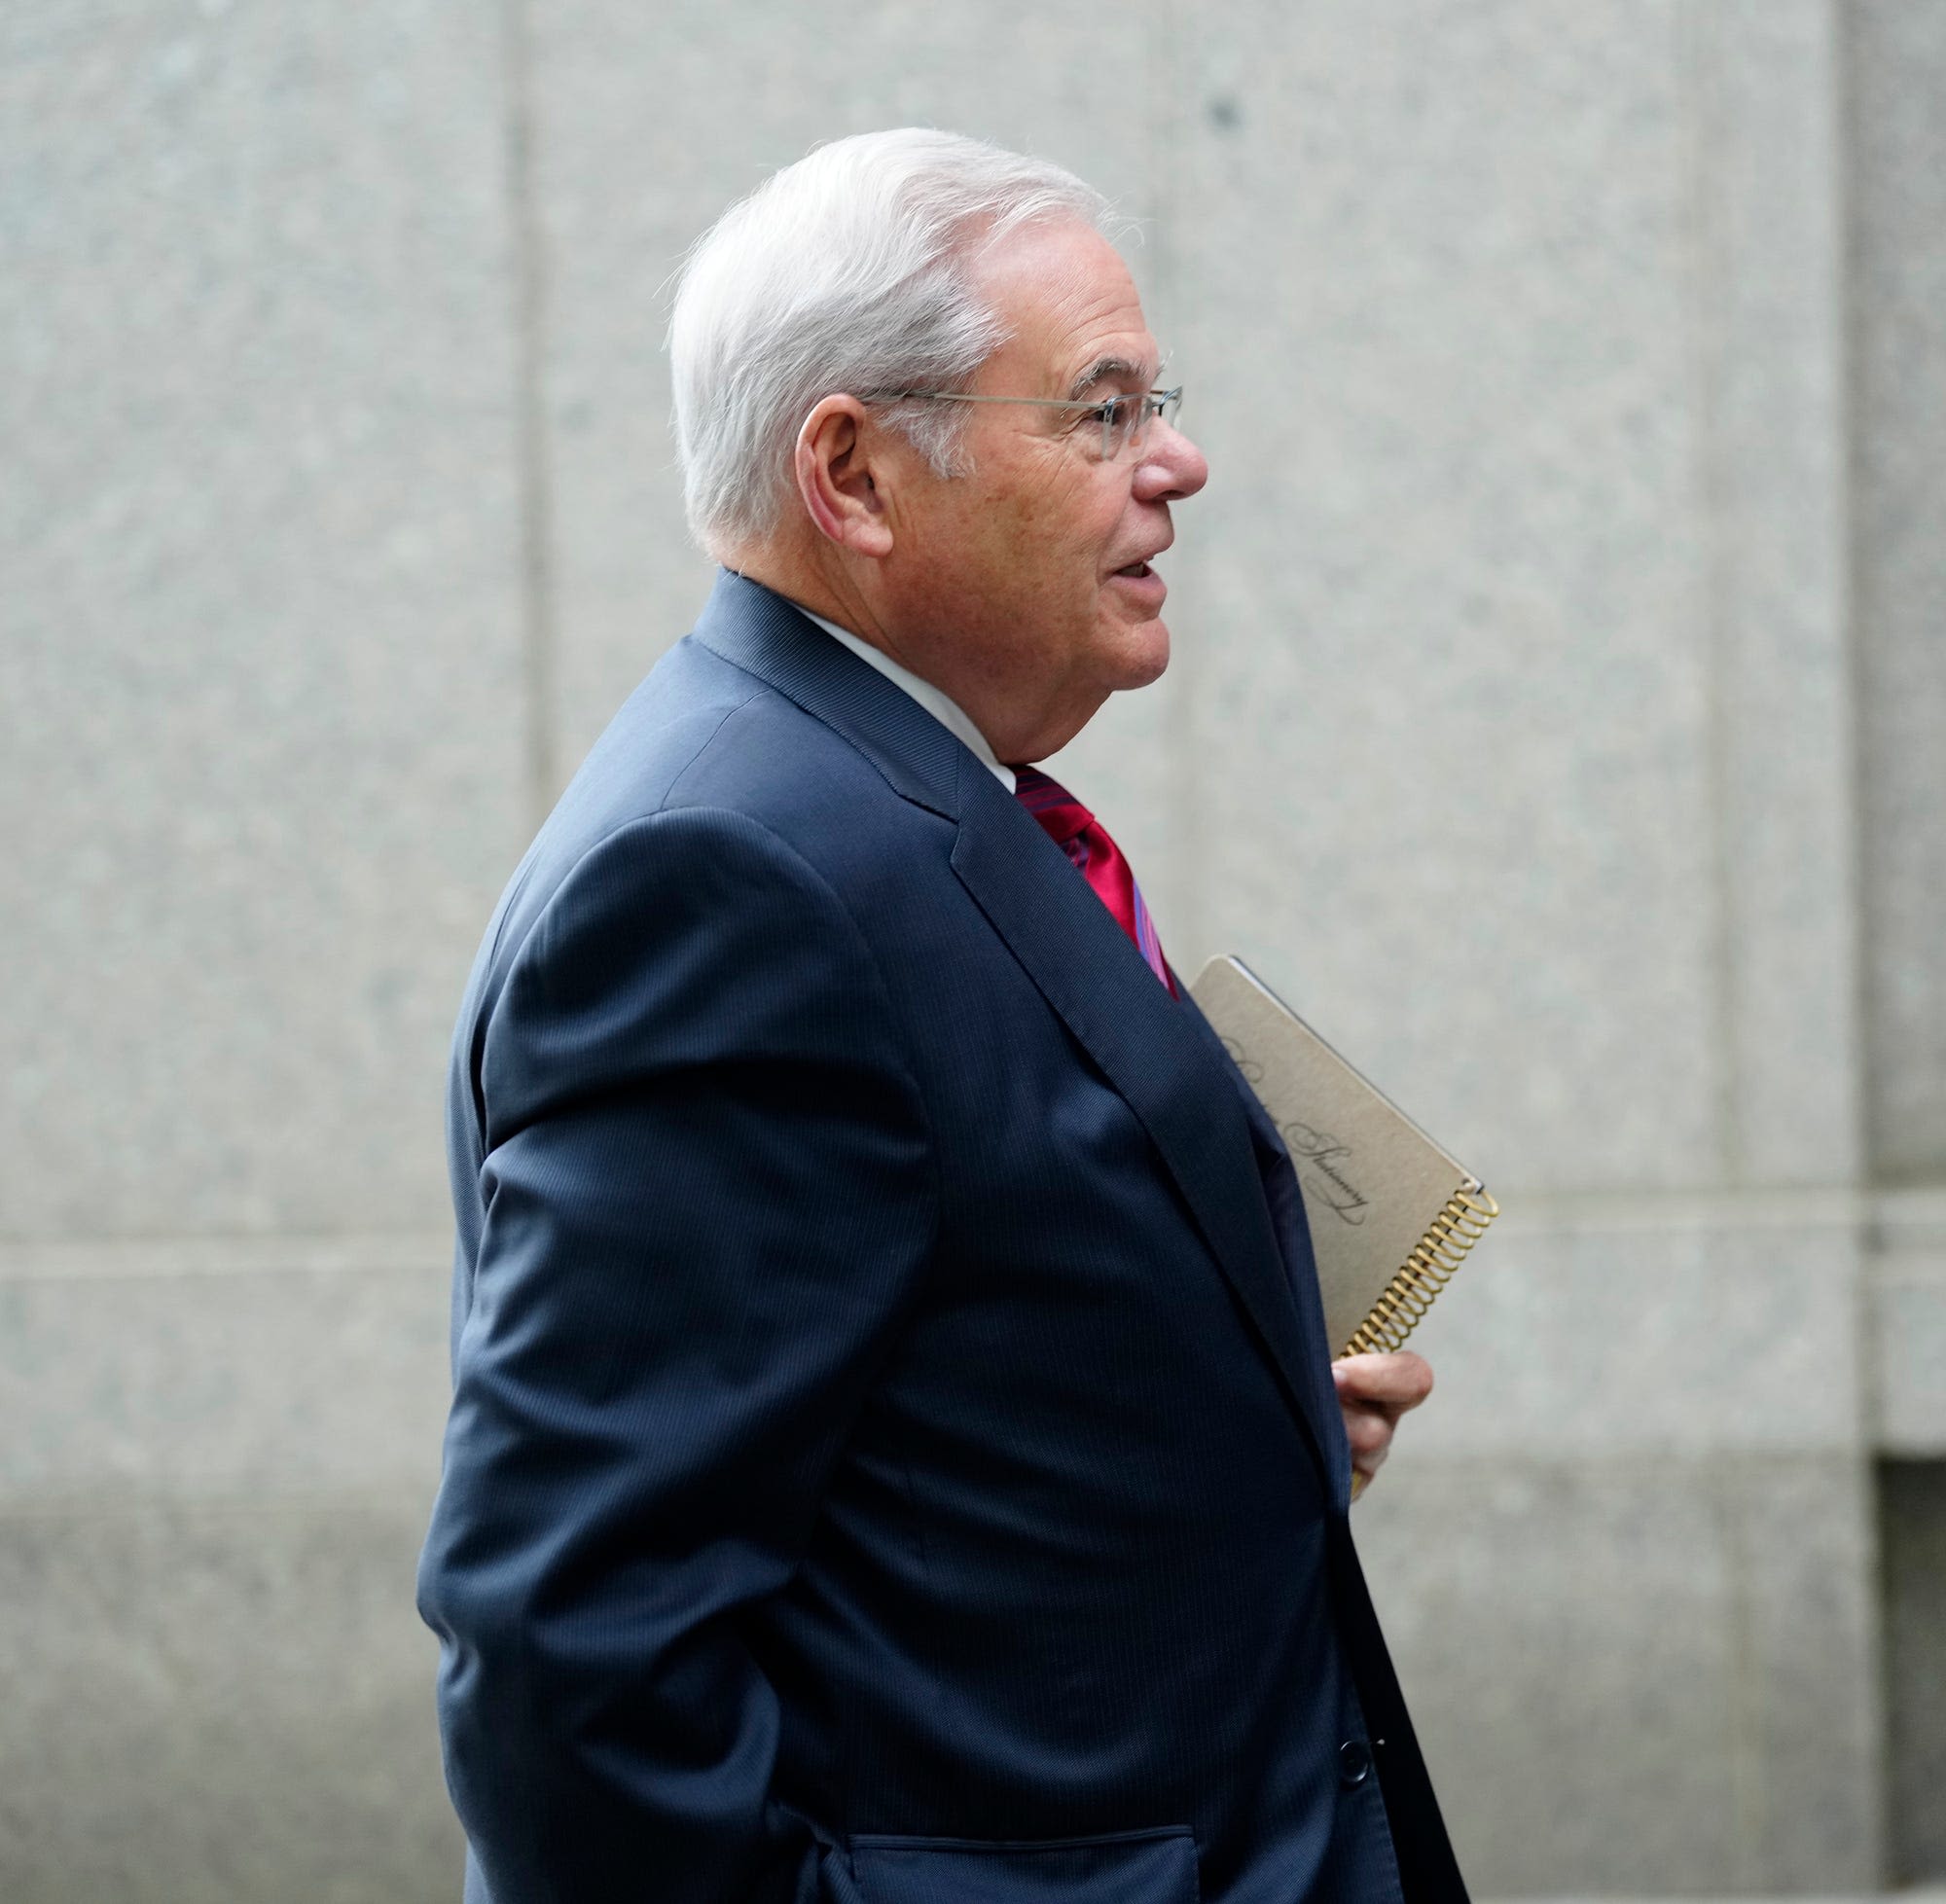 Bob Menendez is settling into a complex and dramatic trial — by crooning | Stile